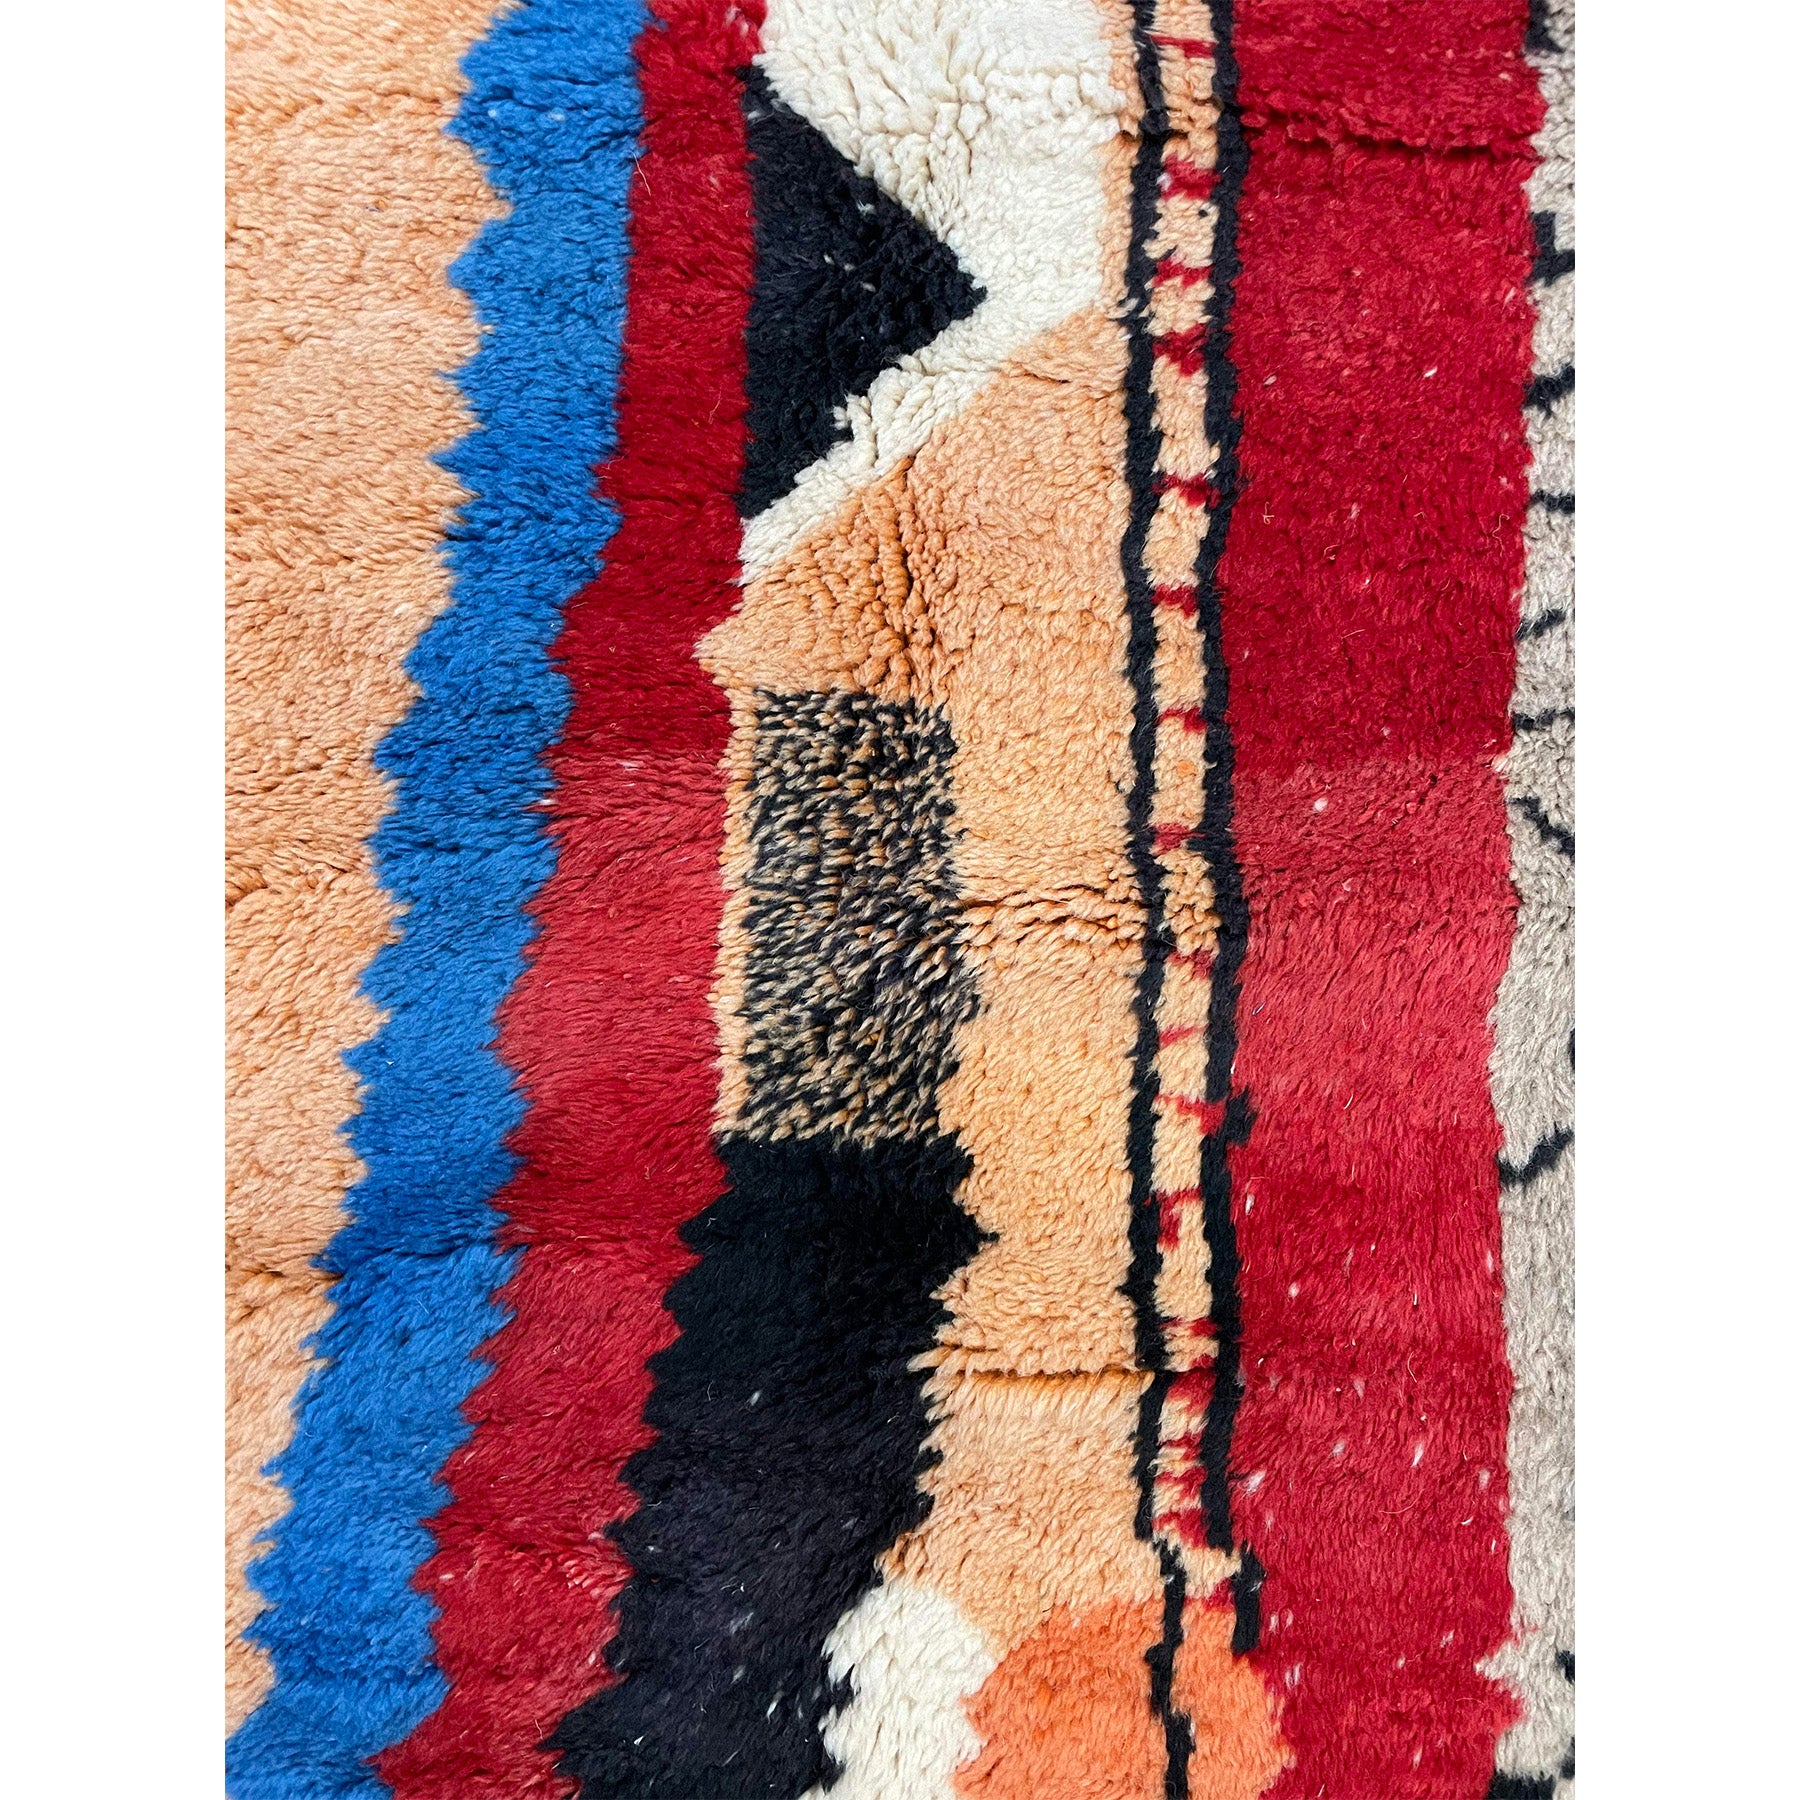 Handwoven Moroccan bedroom rug with colorful details - Kantara | Moroccan Rugs